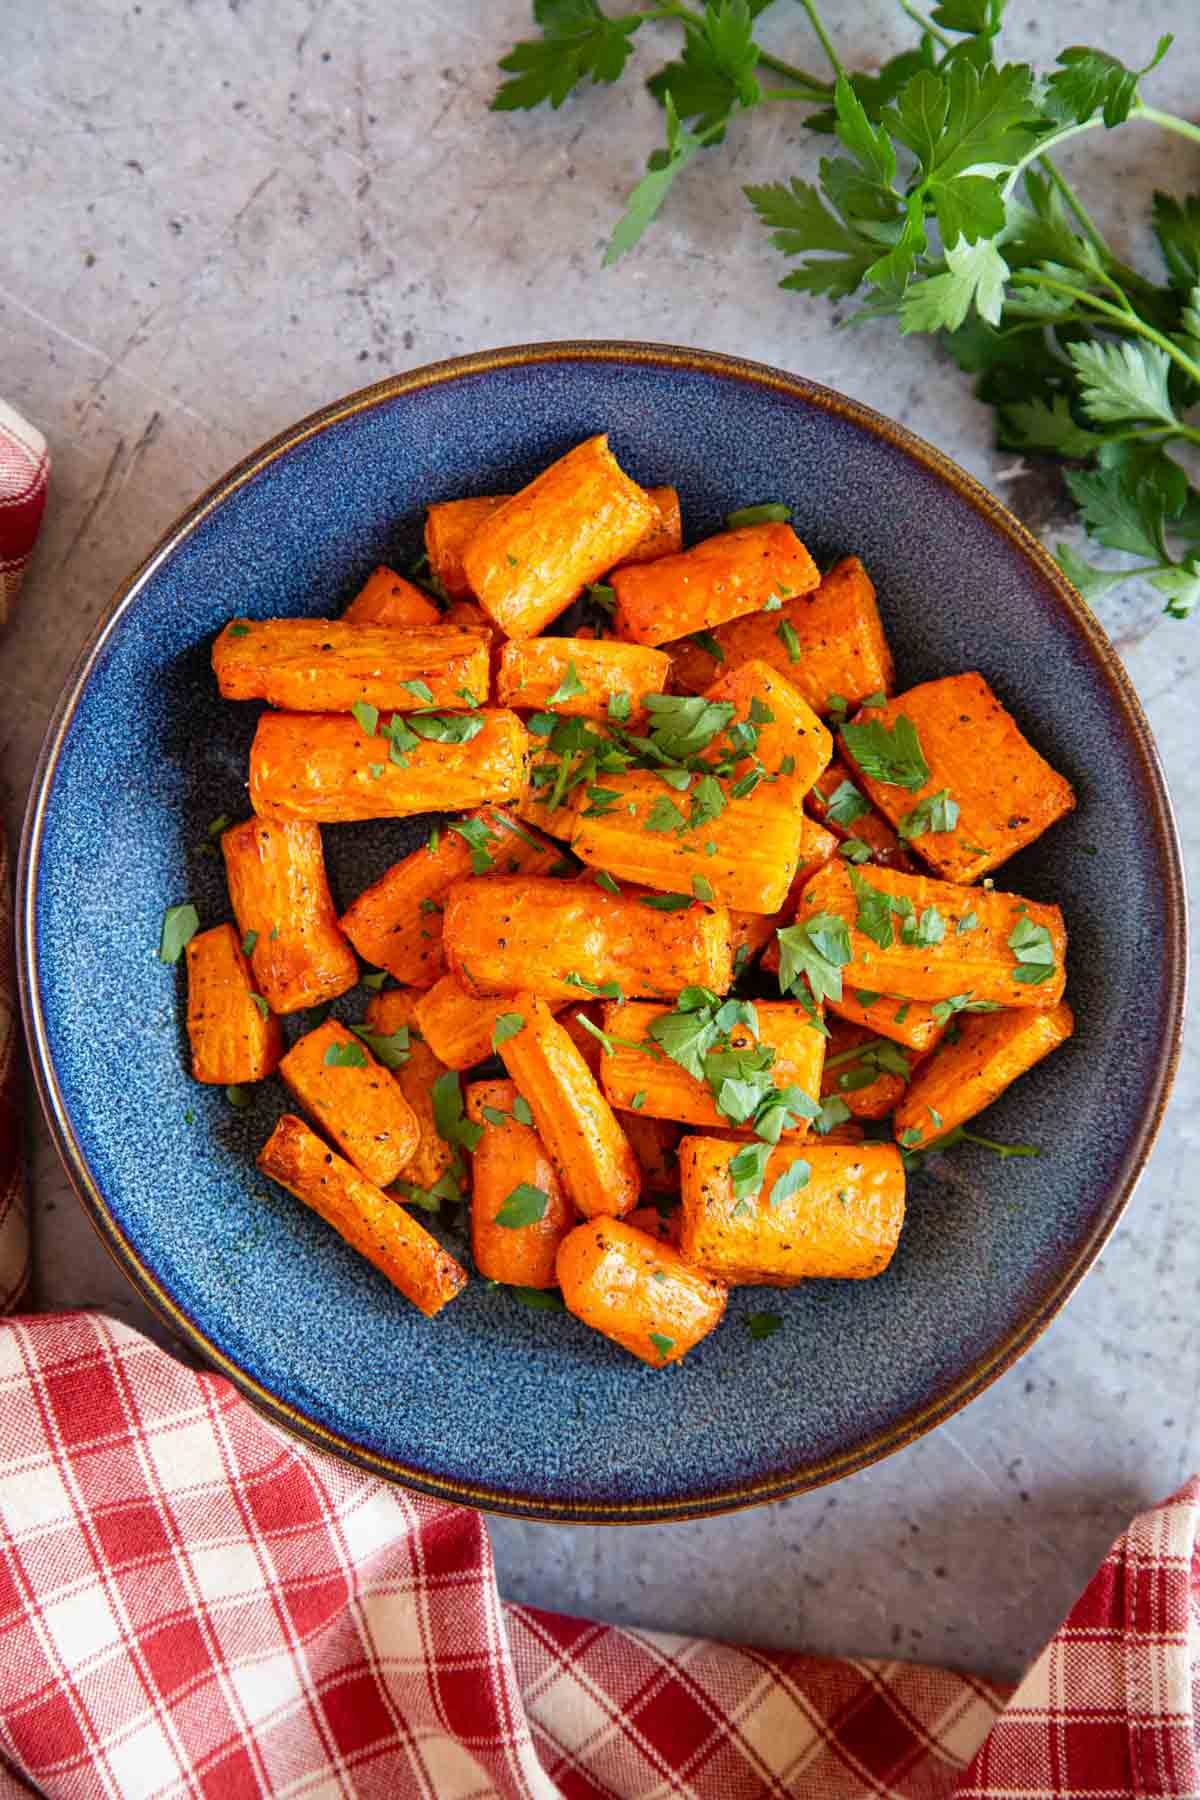 Air fryer carrot brought fresh to the table, hot and golden.